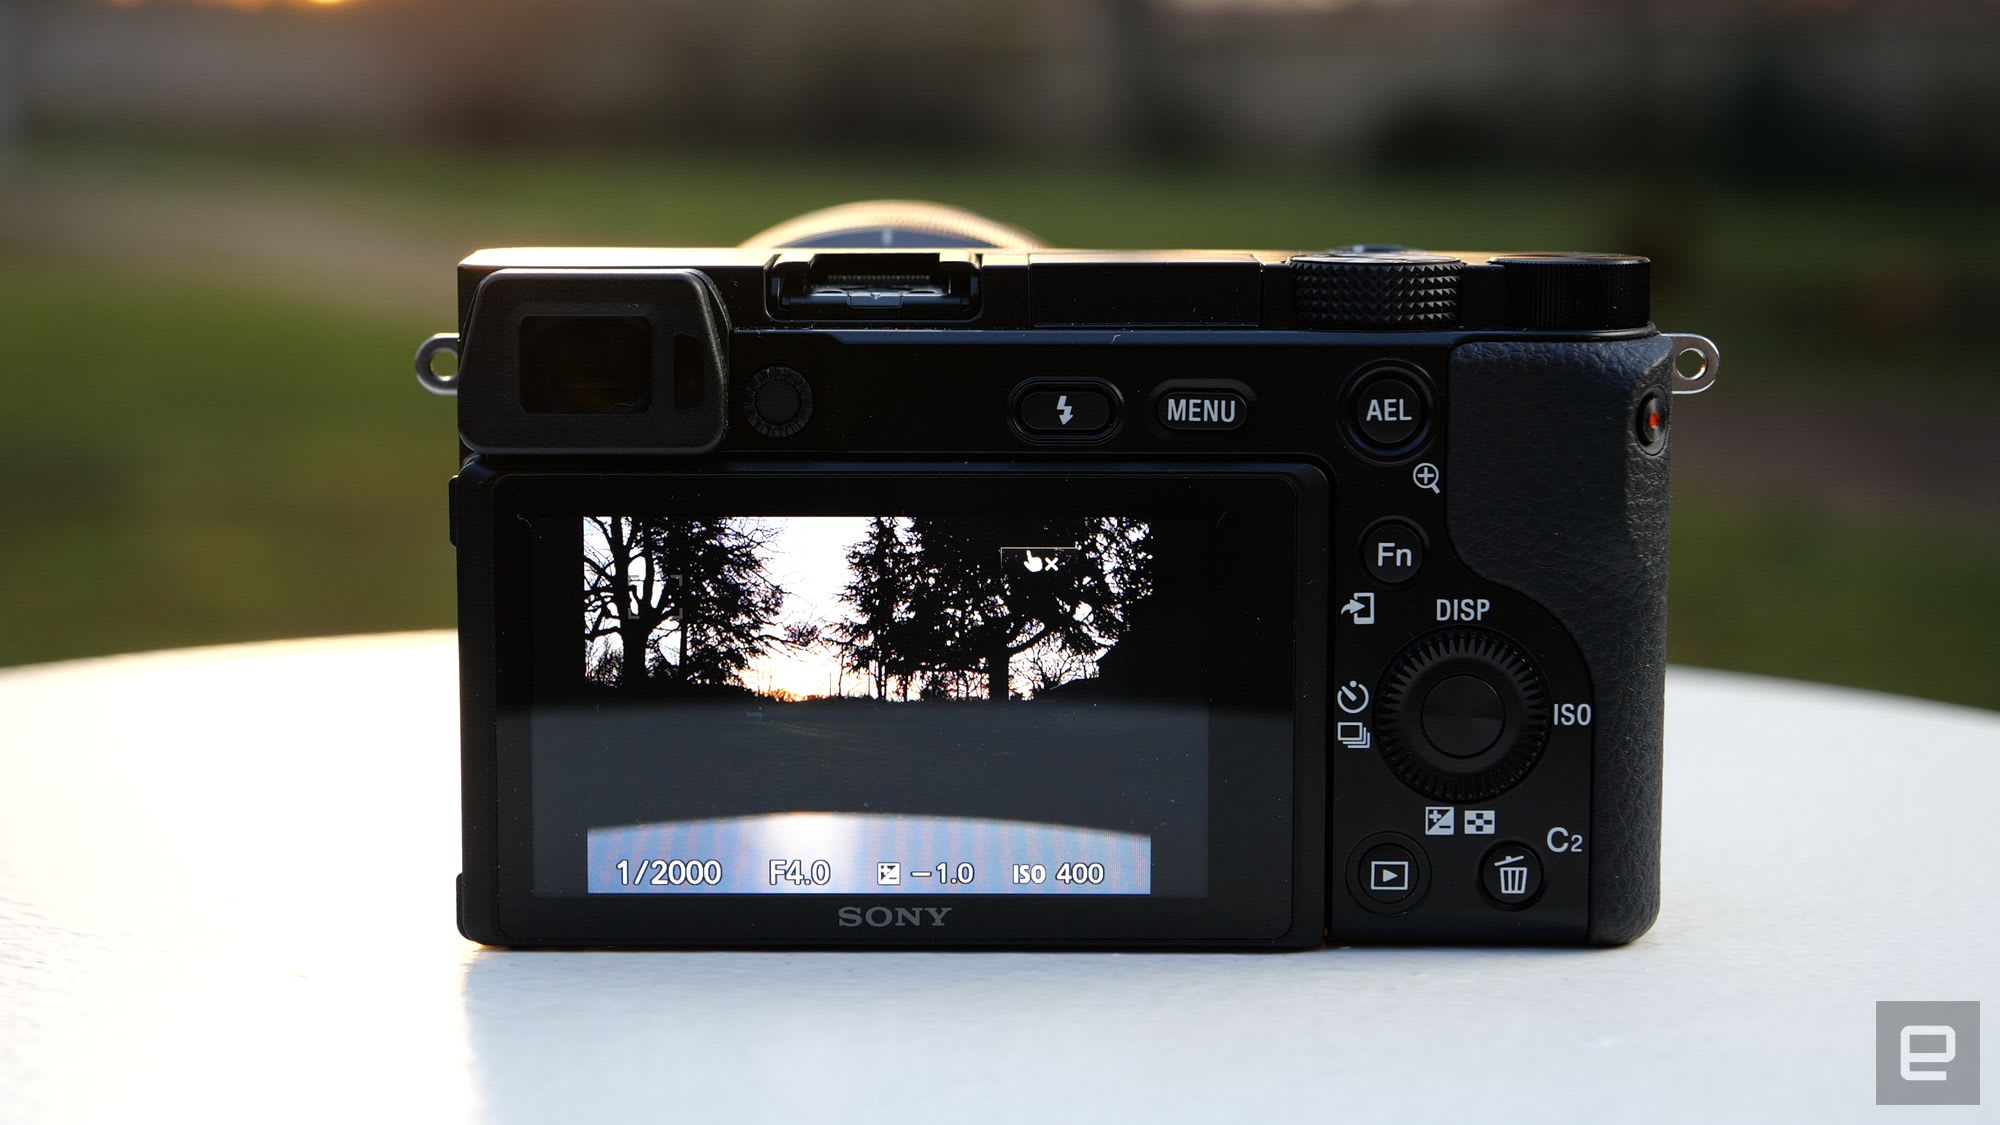 Sony A6100 mirrorless camera review